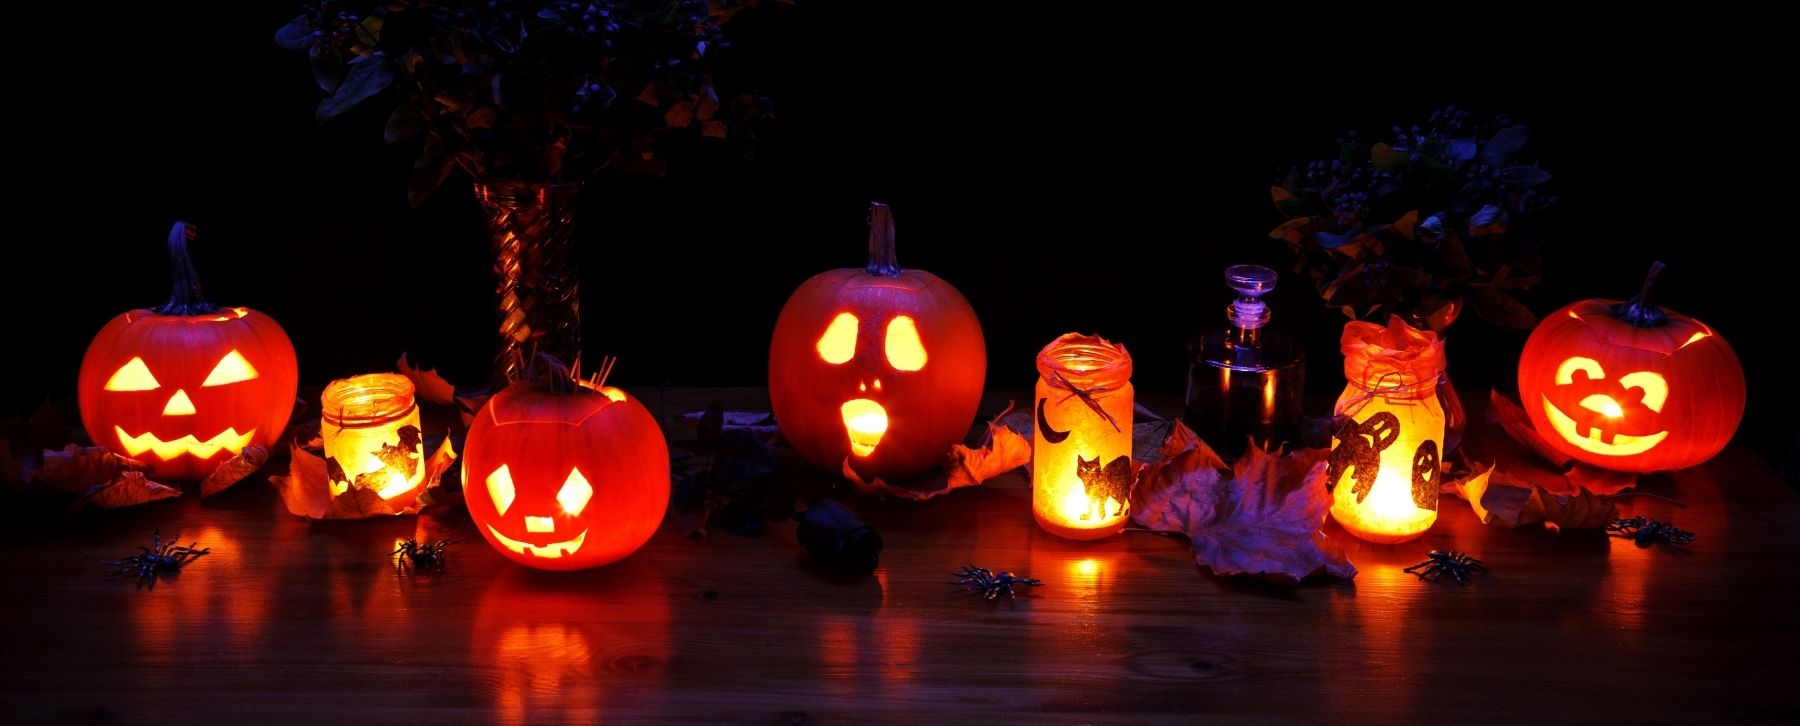 Ready for a Spooky Good Time? RealSteel 2020 Halloween Safety Tips For Children & Adults!